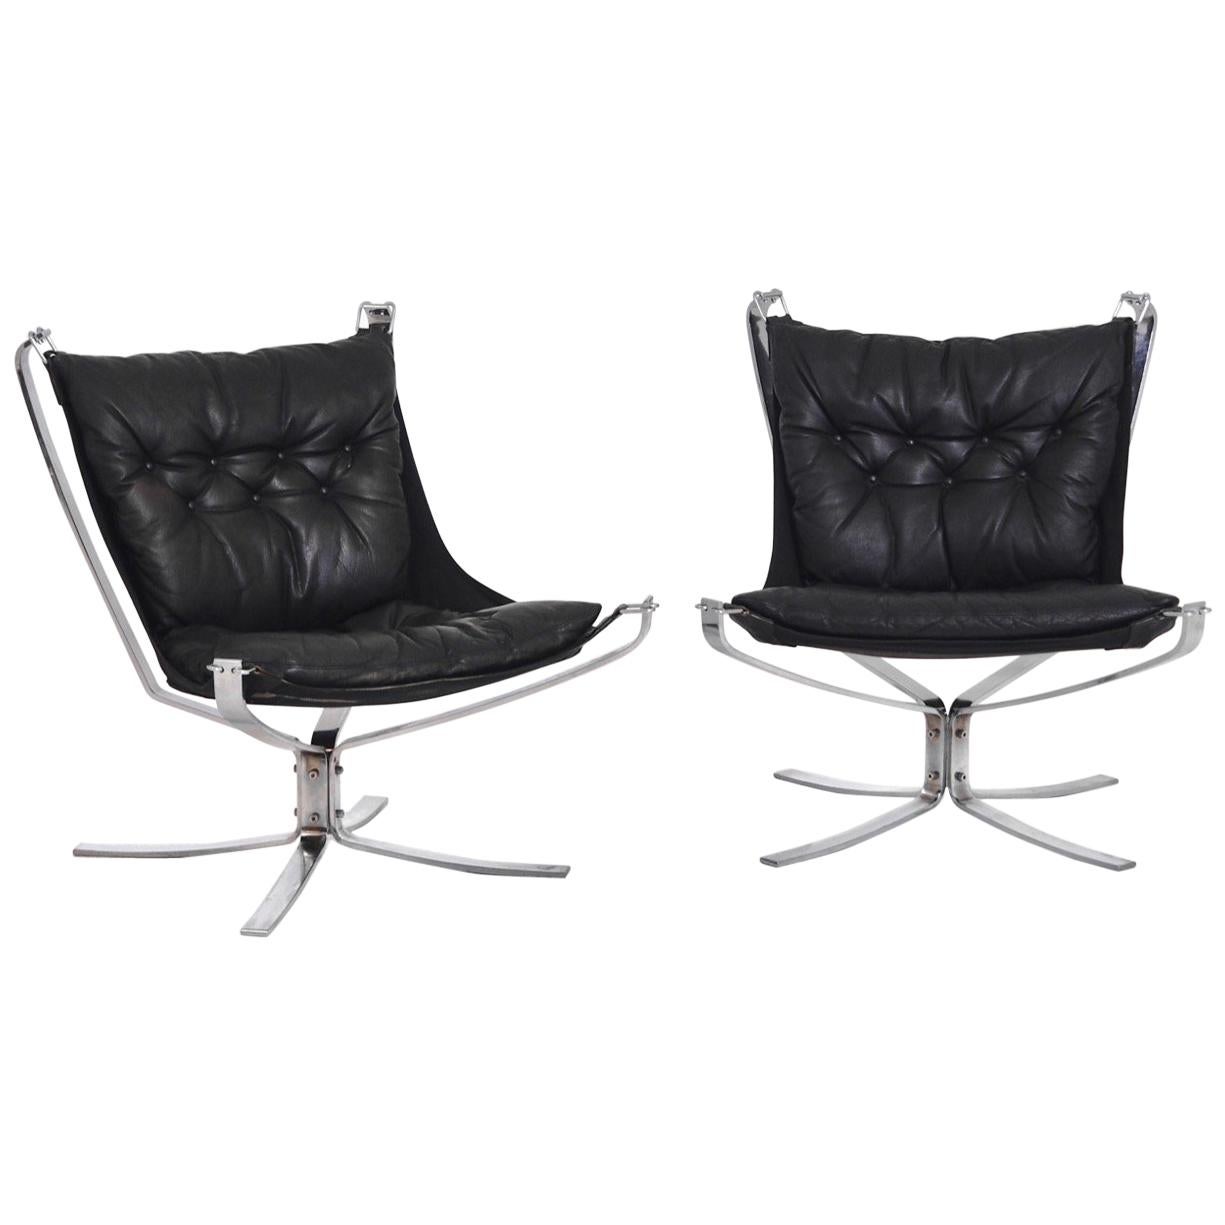 Pair of Falcon Chairs by Vatne Møbler in Sweden, Mid-20th Century